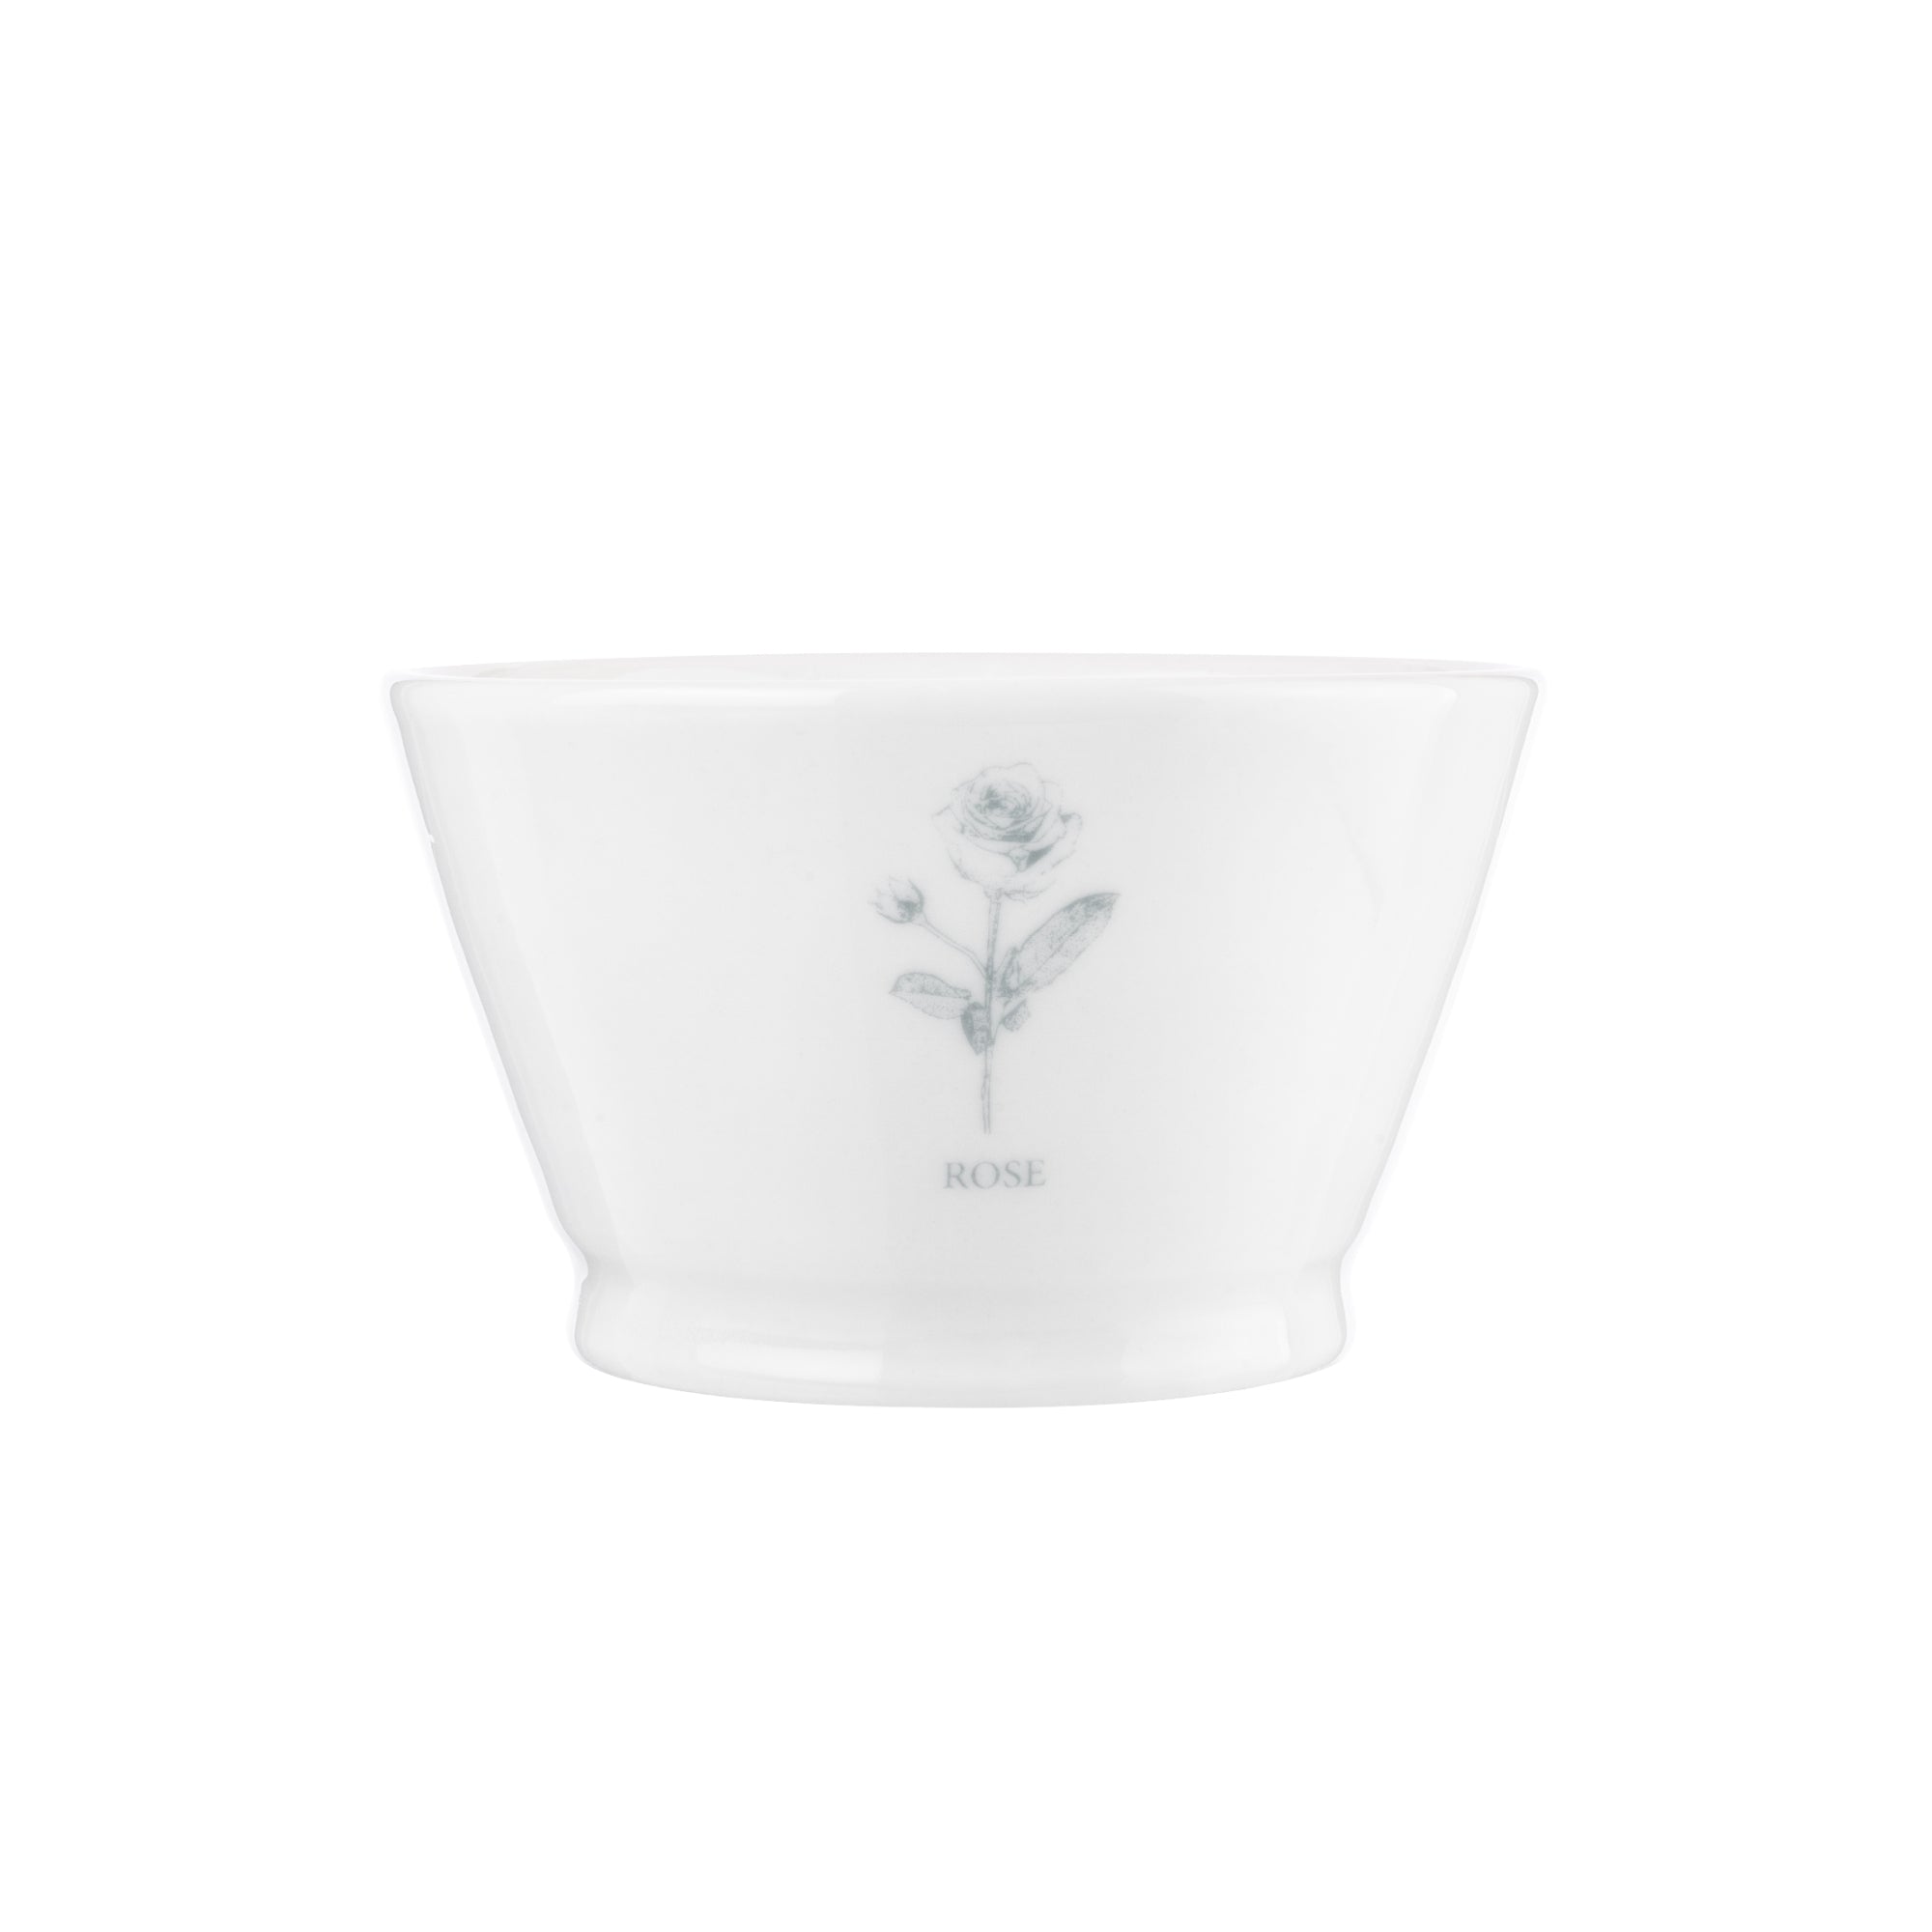 MARY BERRY ENGLISH GARDEN EXTRA SMALL SERVING BOWL | ROSE